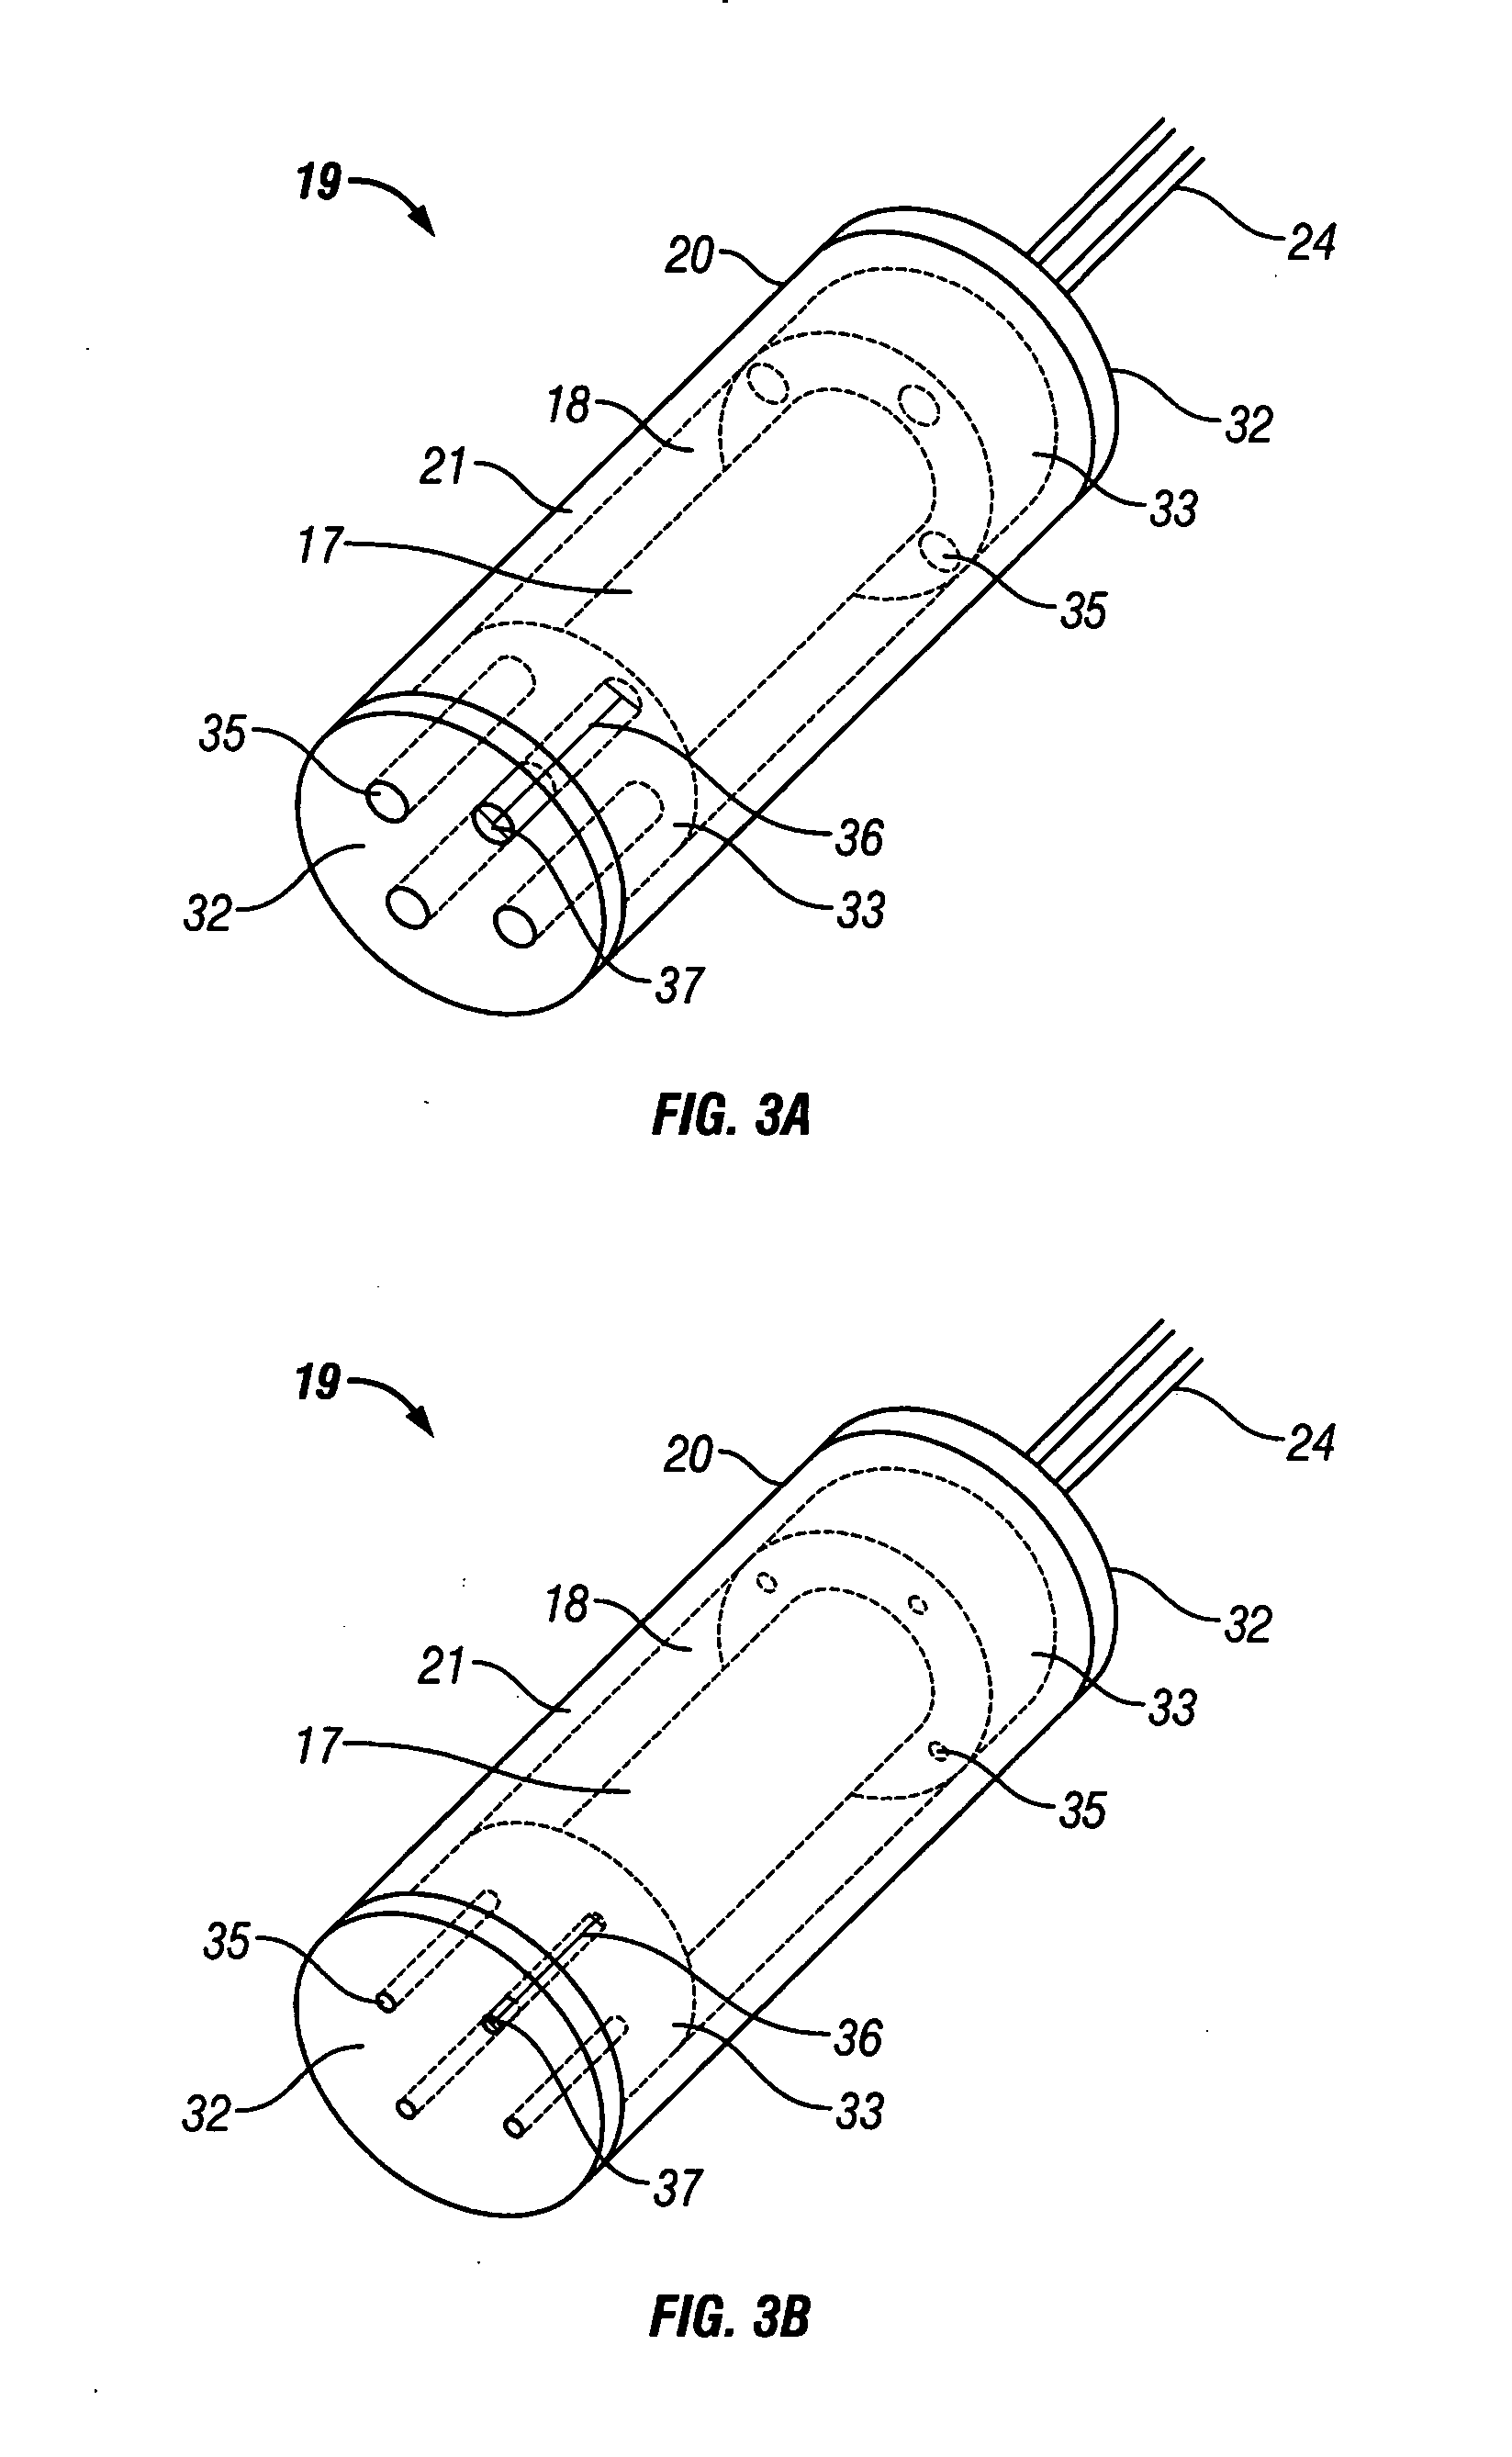 Apparatus for attenuating noise in marine seismic streamers